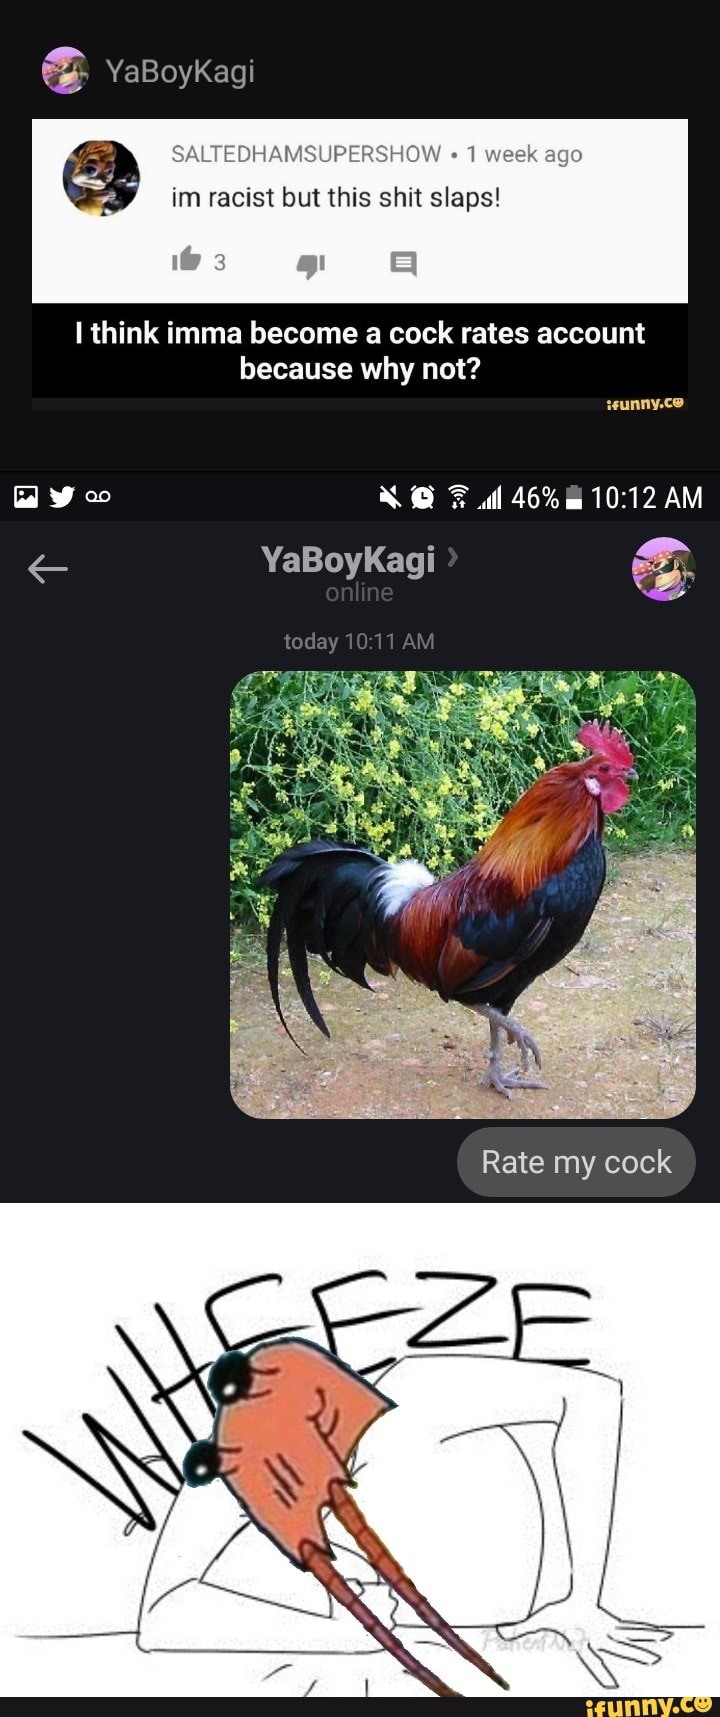 Rate cocks